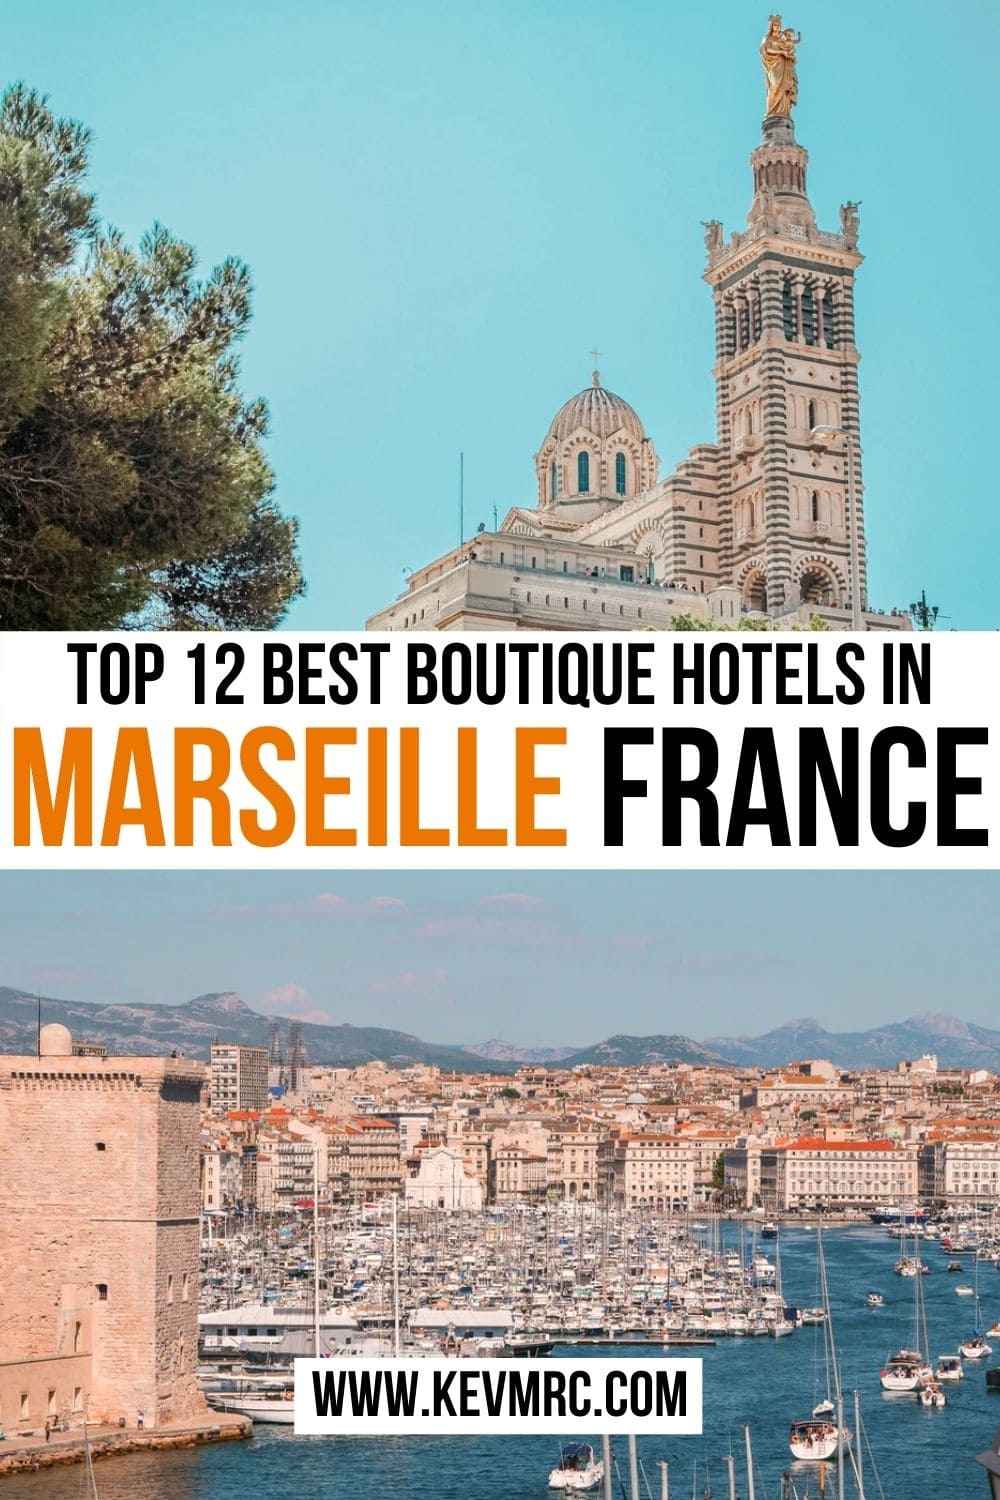 Marseille is so full of nice boutique hotels that it can be hard to make a decision. I've wrote this post right to help you through this! Find out my selection of the 12 best boutique hotels in Marseille France with complete reviews and photos! hotel marseille | marseille france hotels | where to stay in marseille | boutique hotels in marseille france